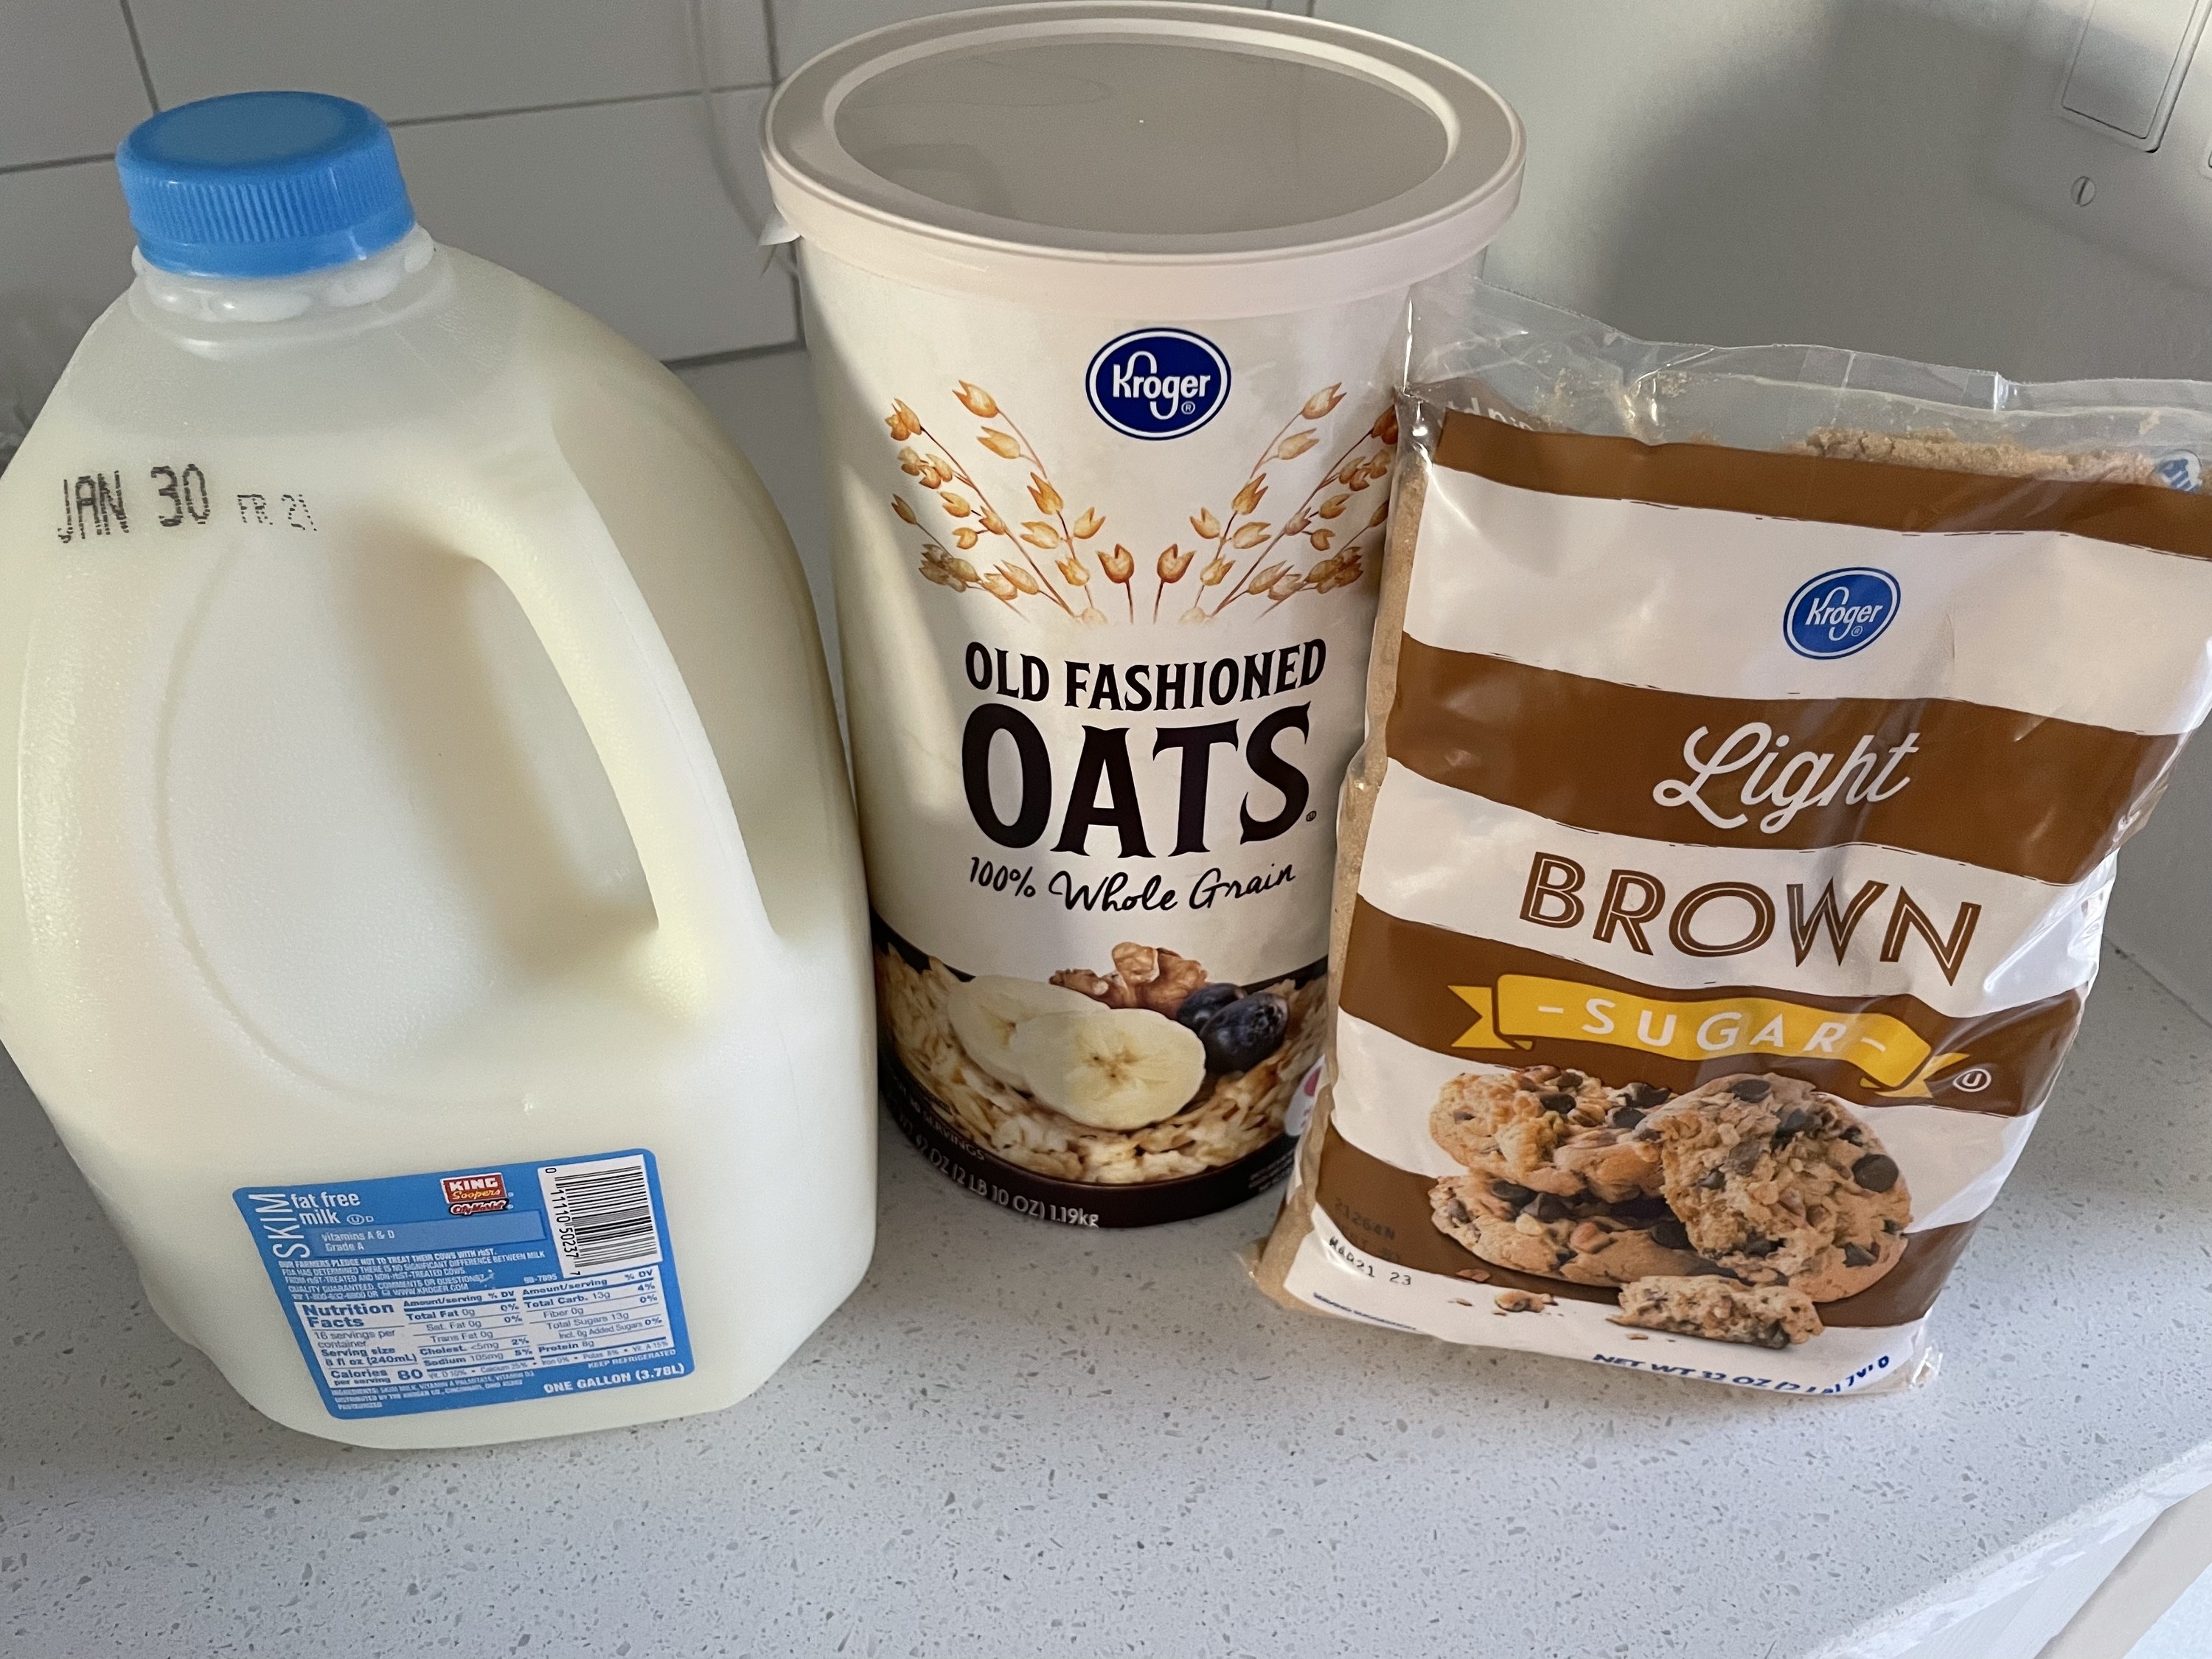 a gallon of milk, old fashioned oats, and light brown sugar